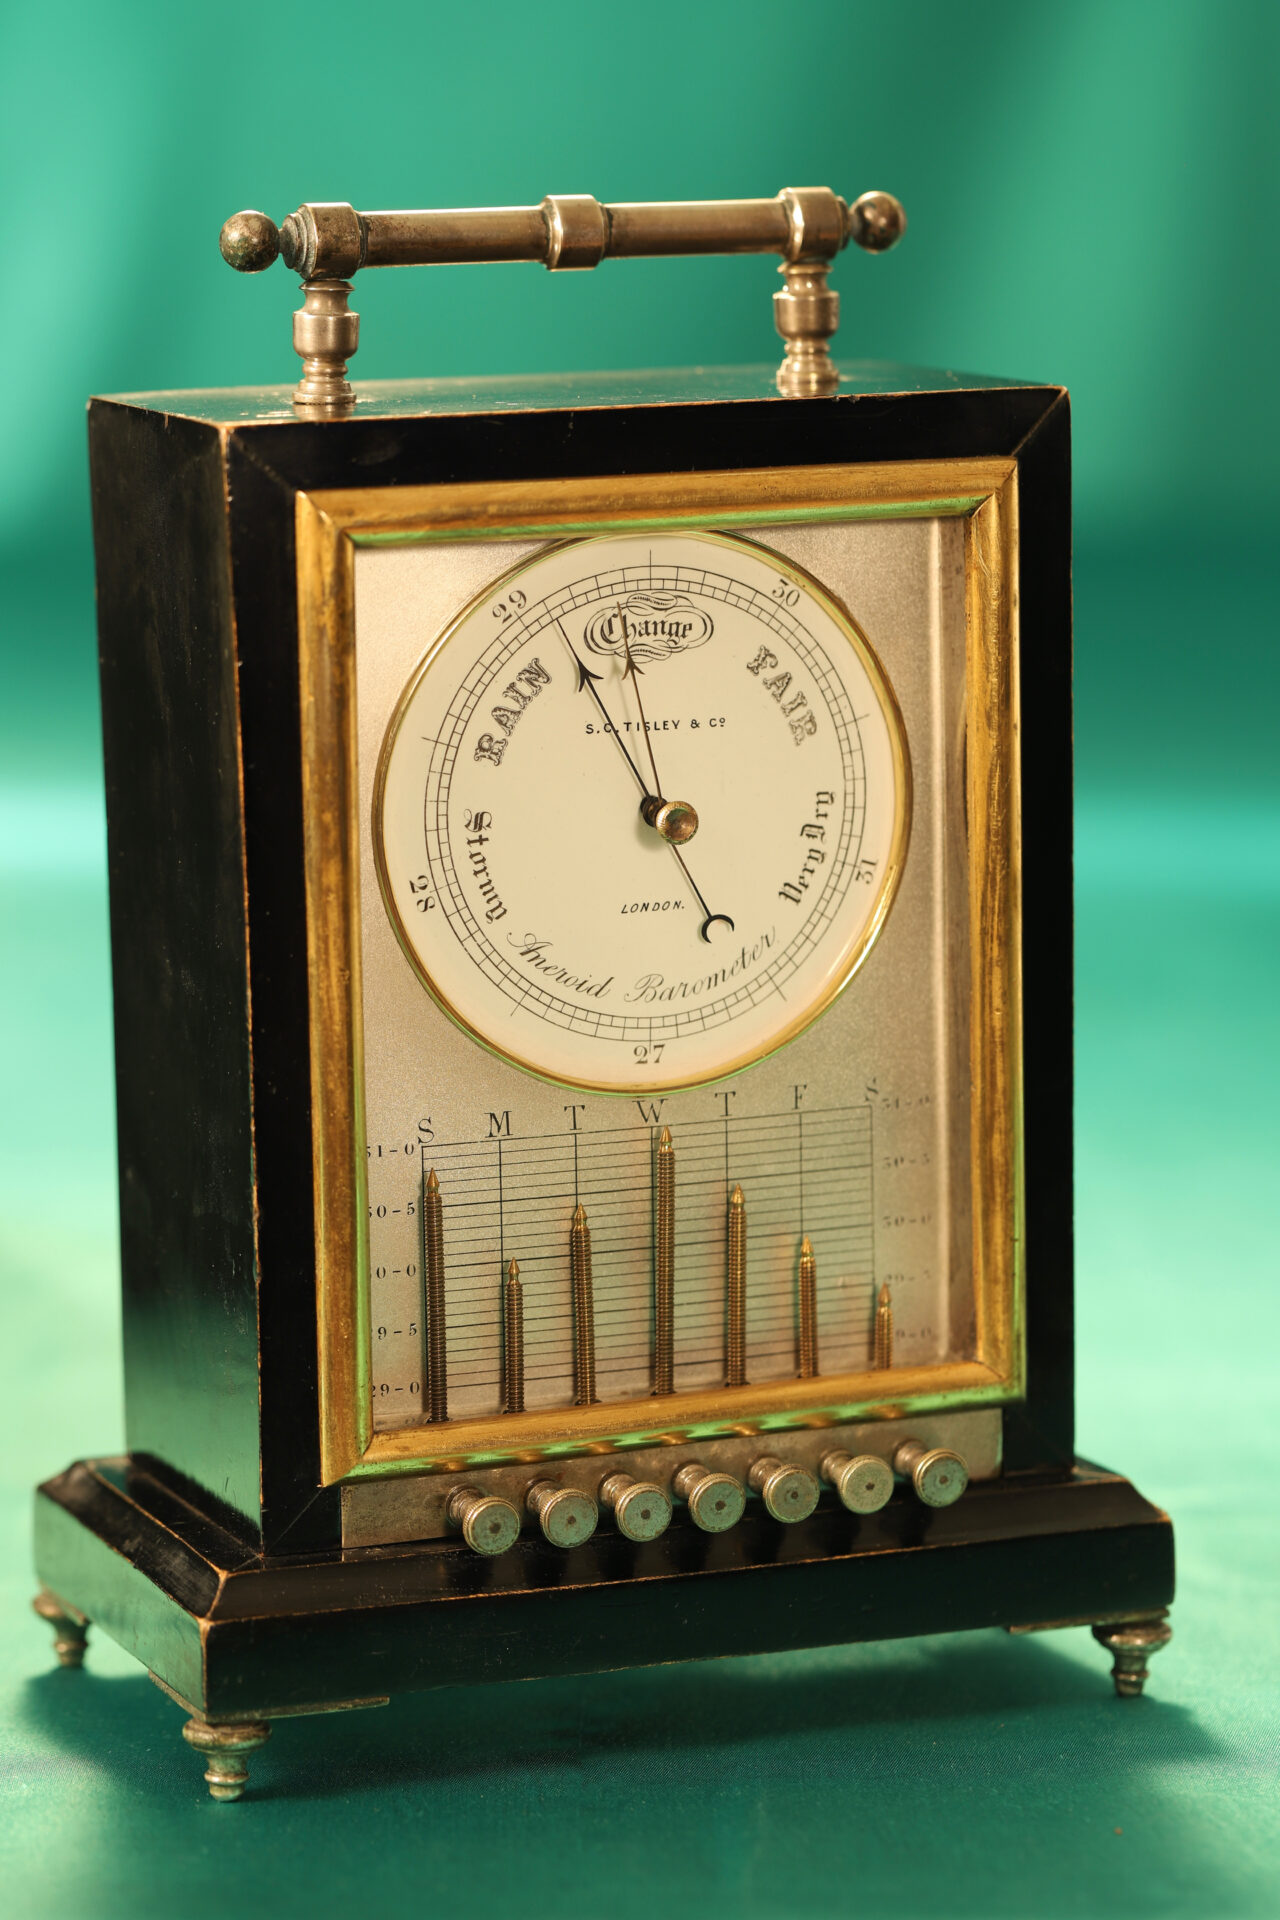 Image of front of Ebonised Recording Aneroid Barometer or Barograph c1878 taken from lefthand side